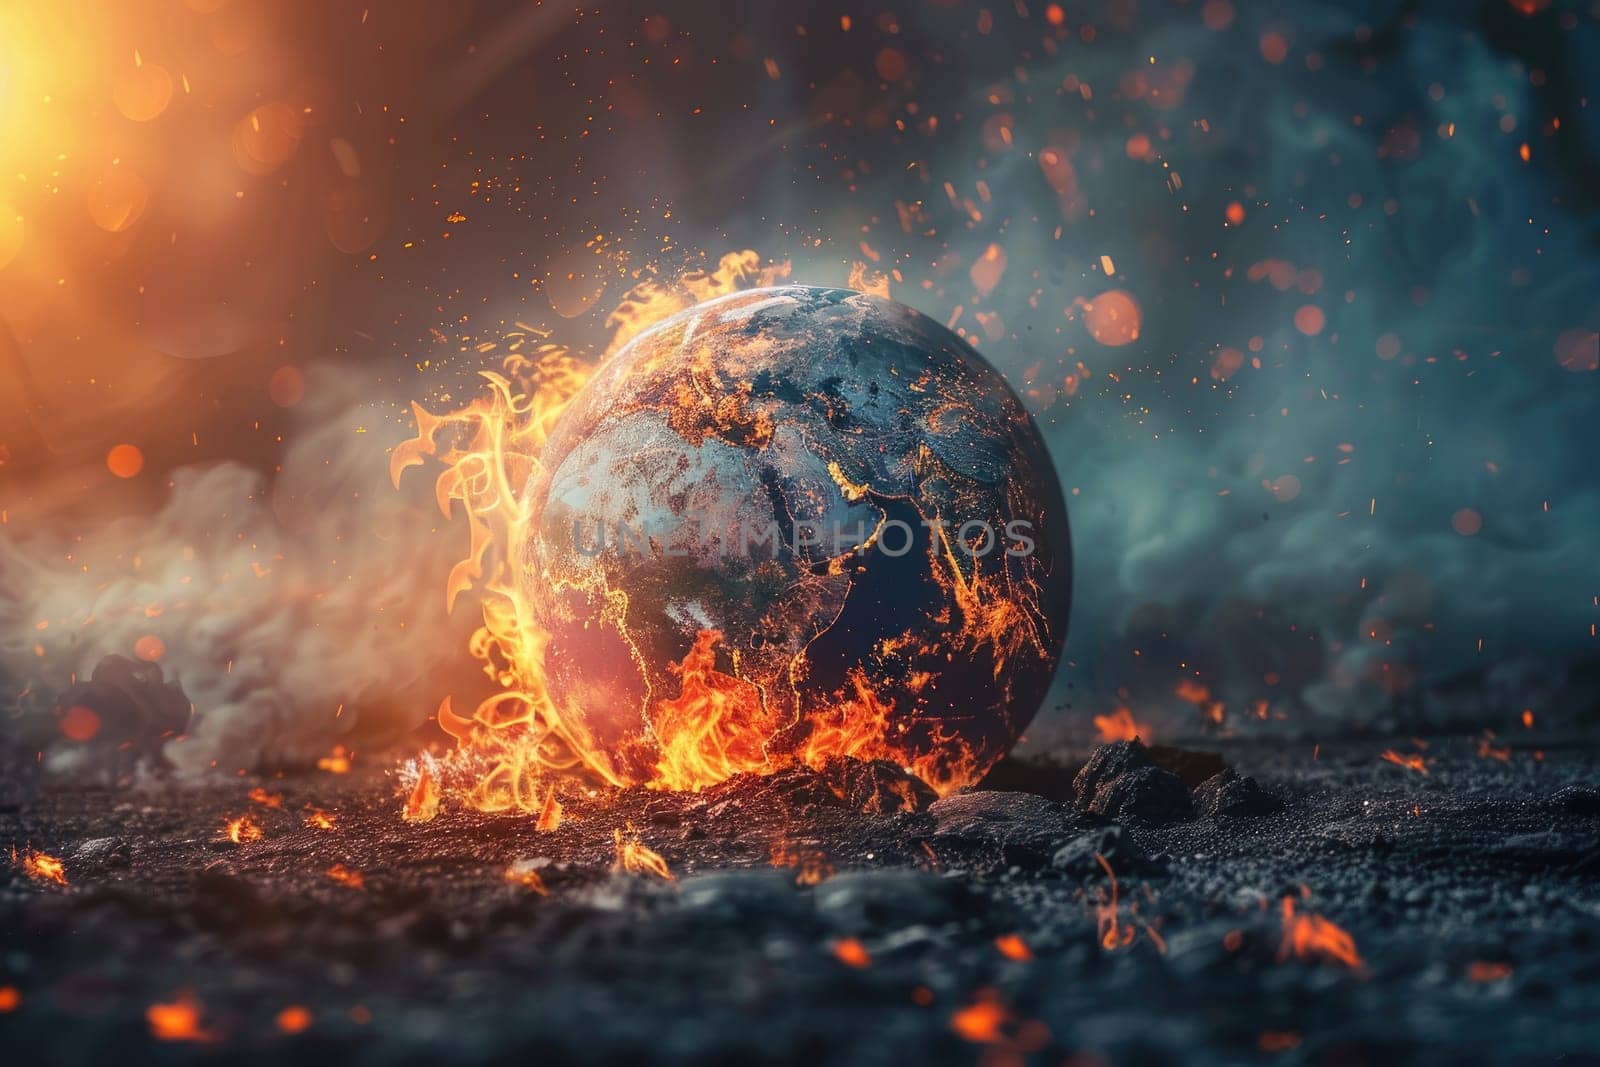 A fire-ravaged planet with a large, glowing ball of fire in the center, Global warming concept by nijieimu